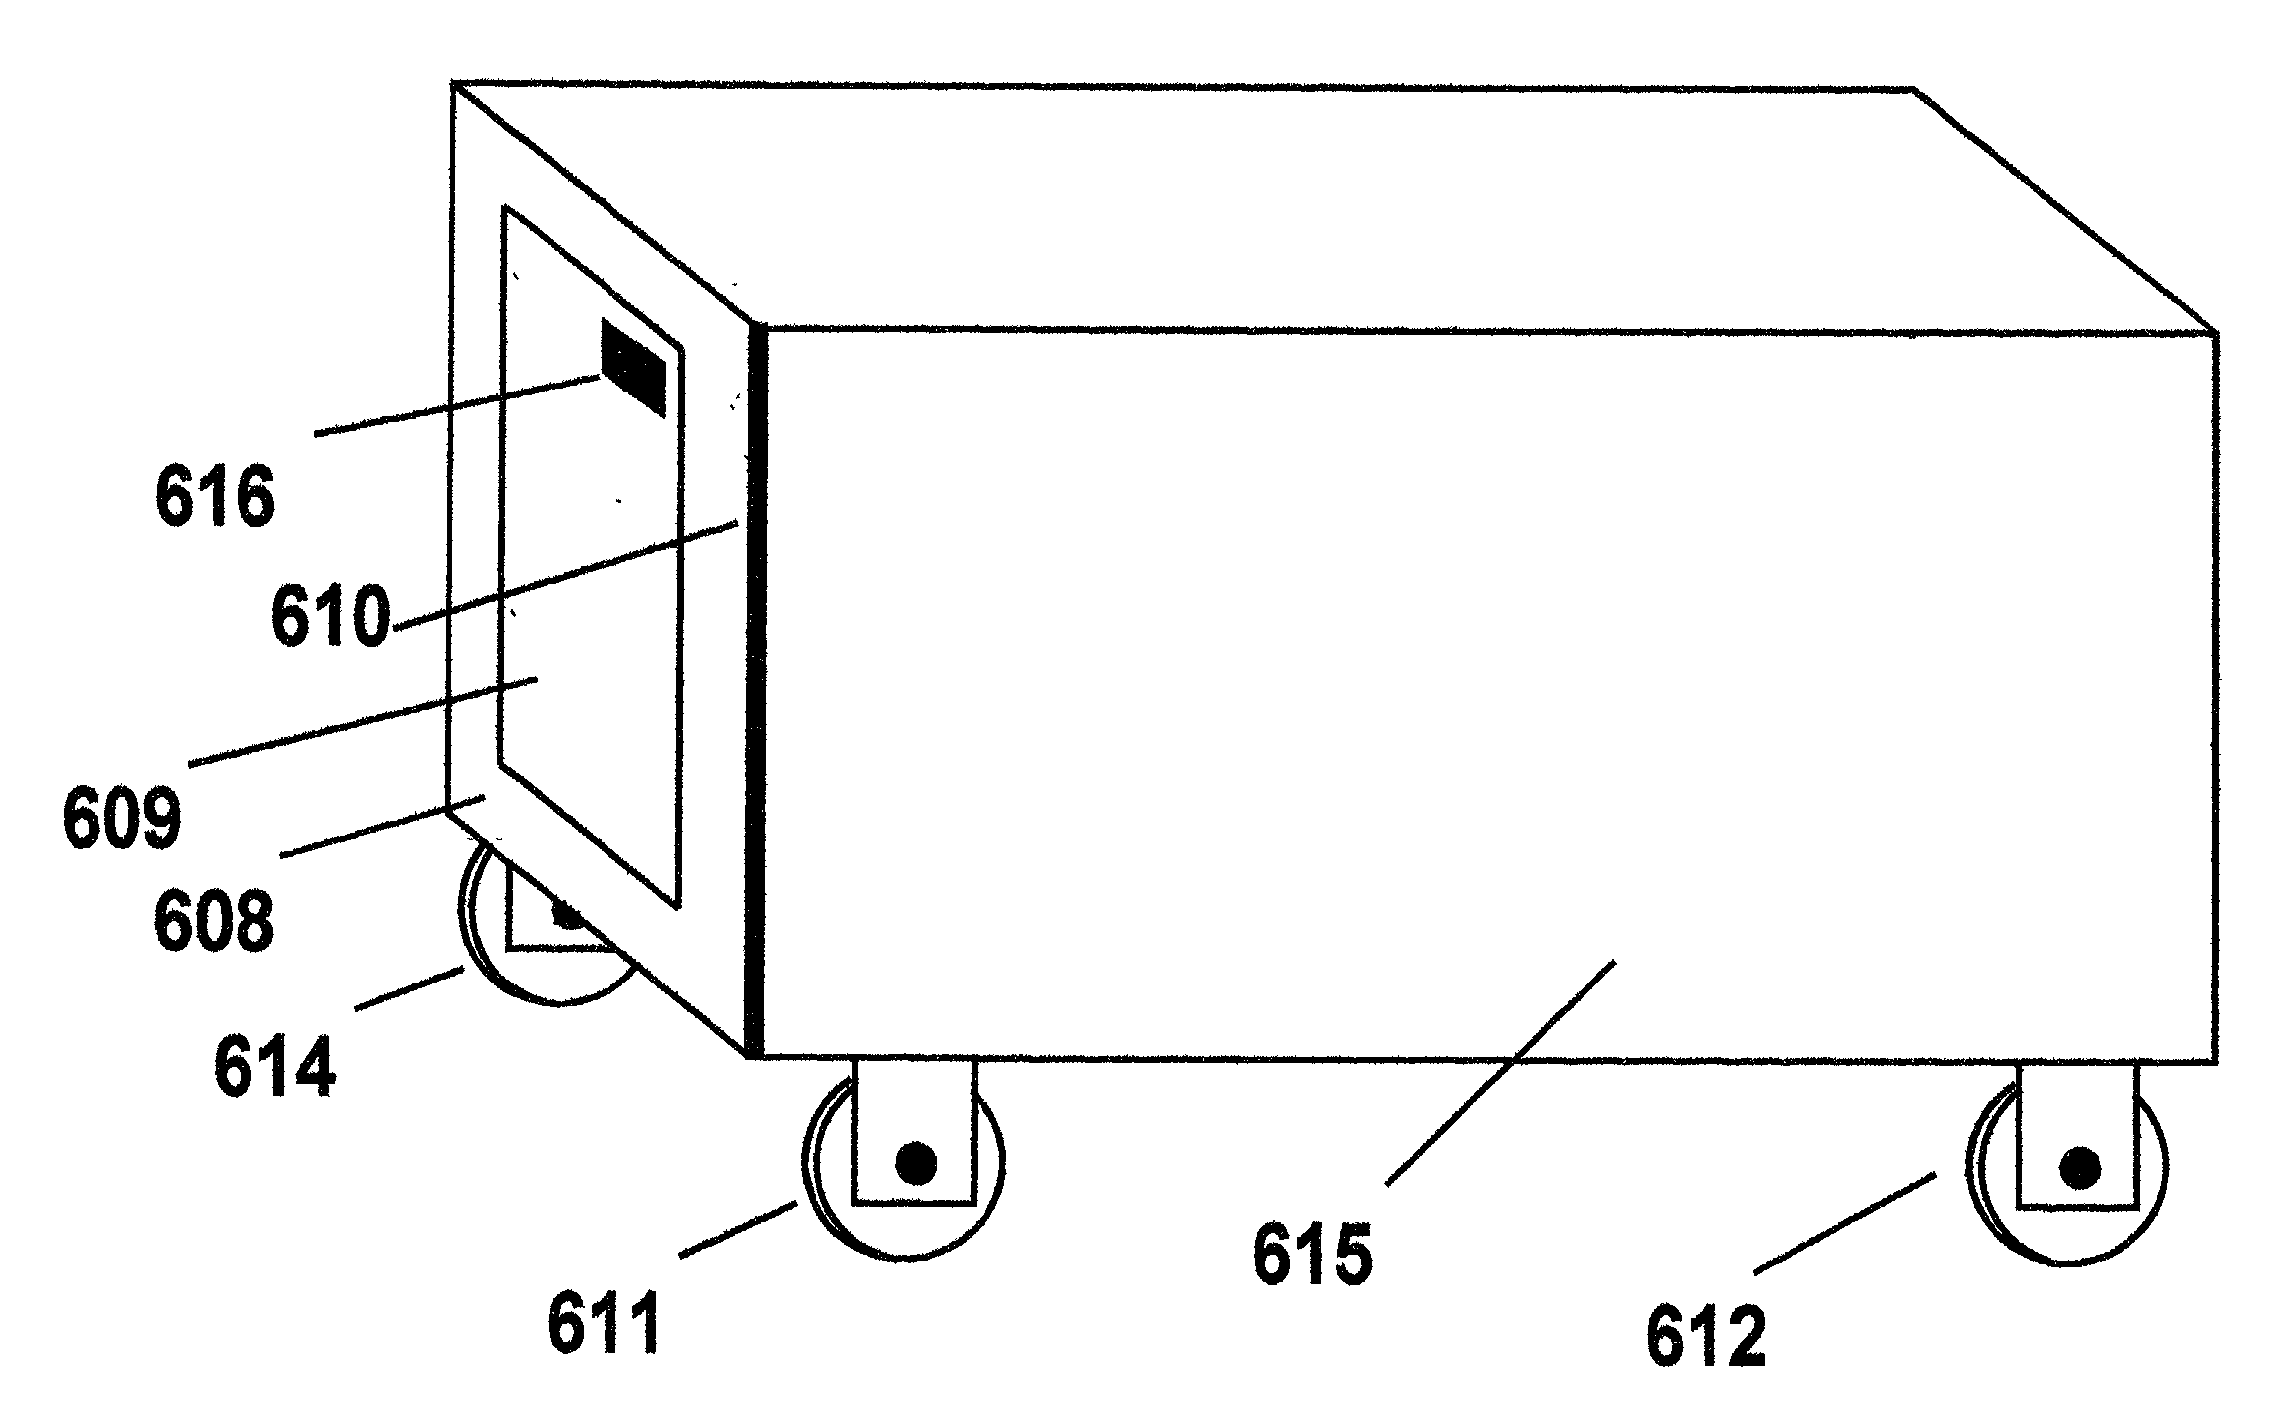 Acoustical noise reducing enclosure for electrical and electronic devices